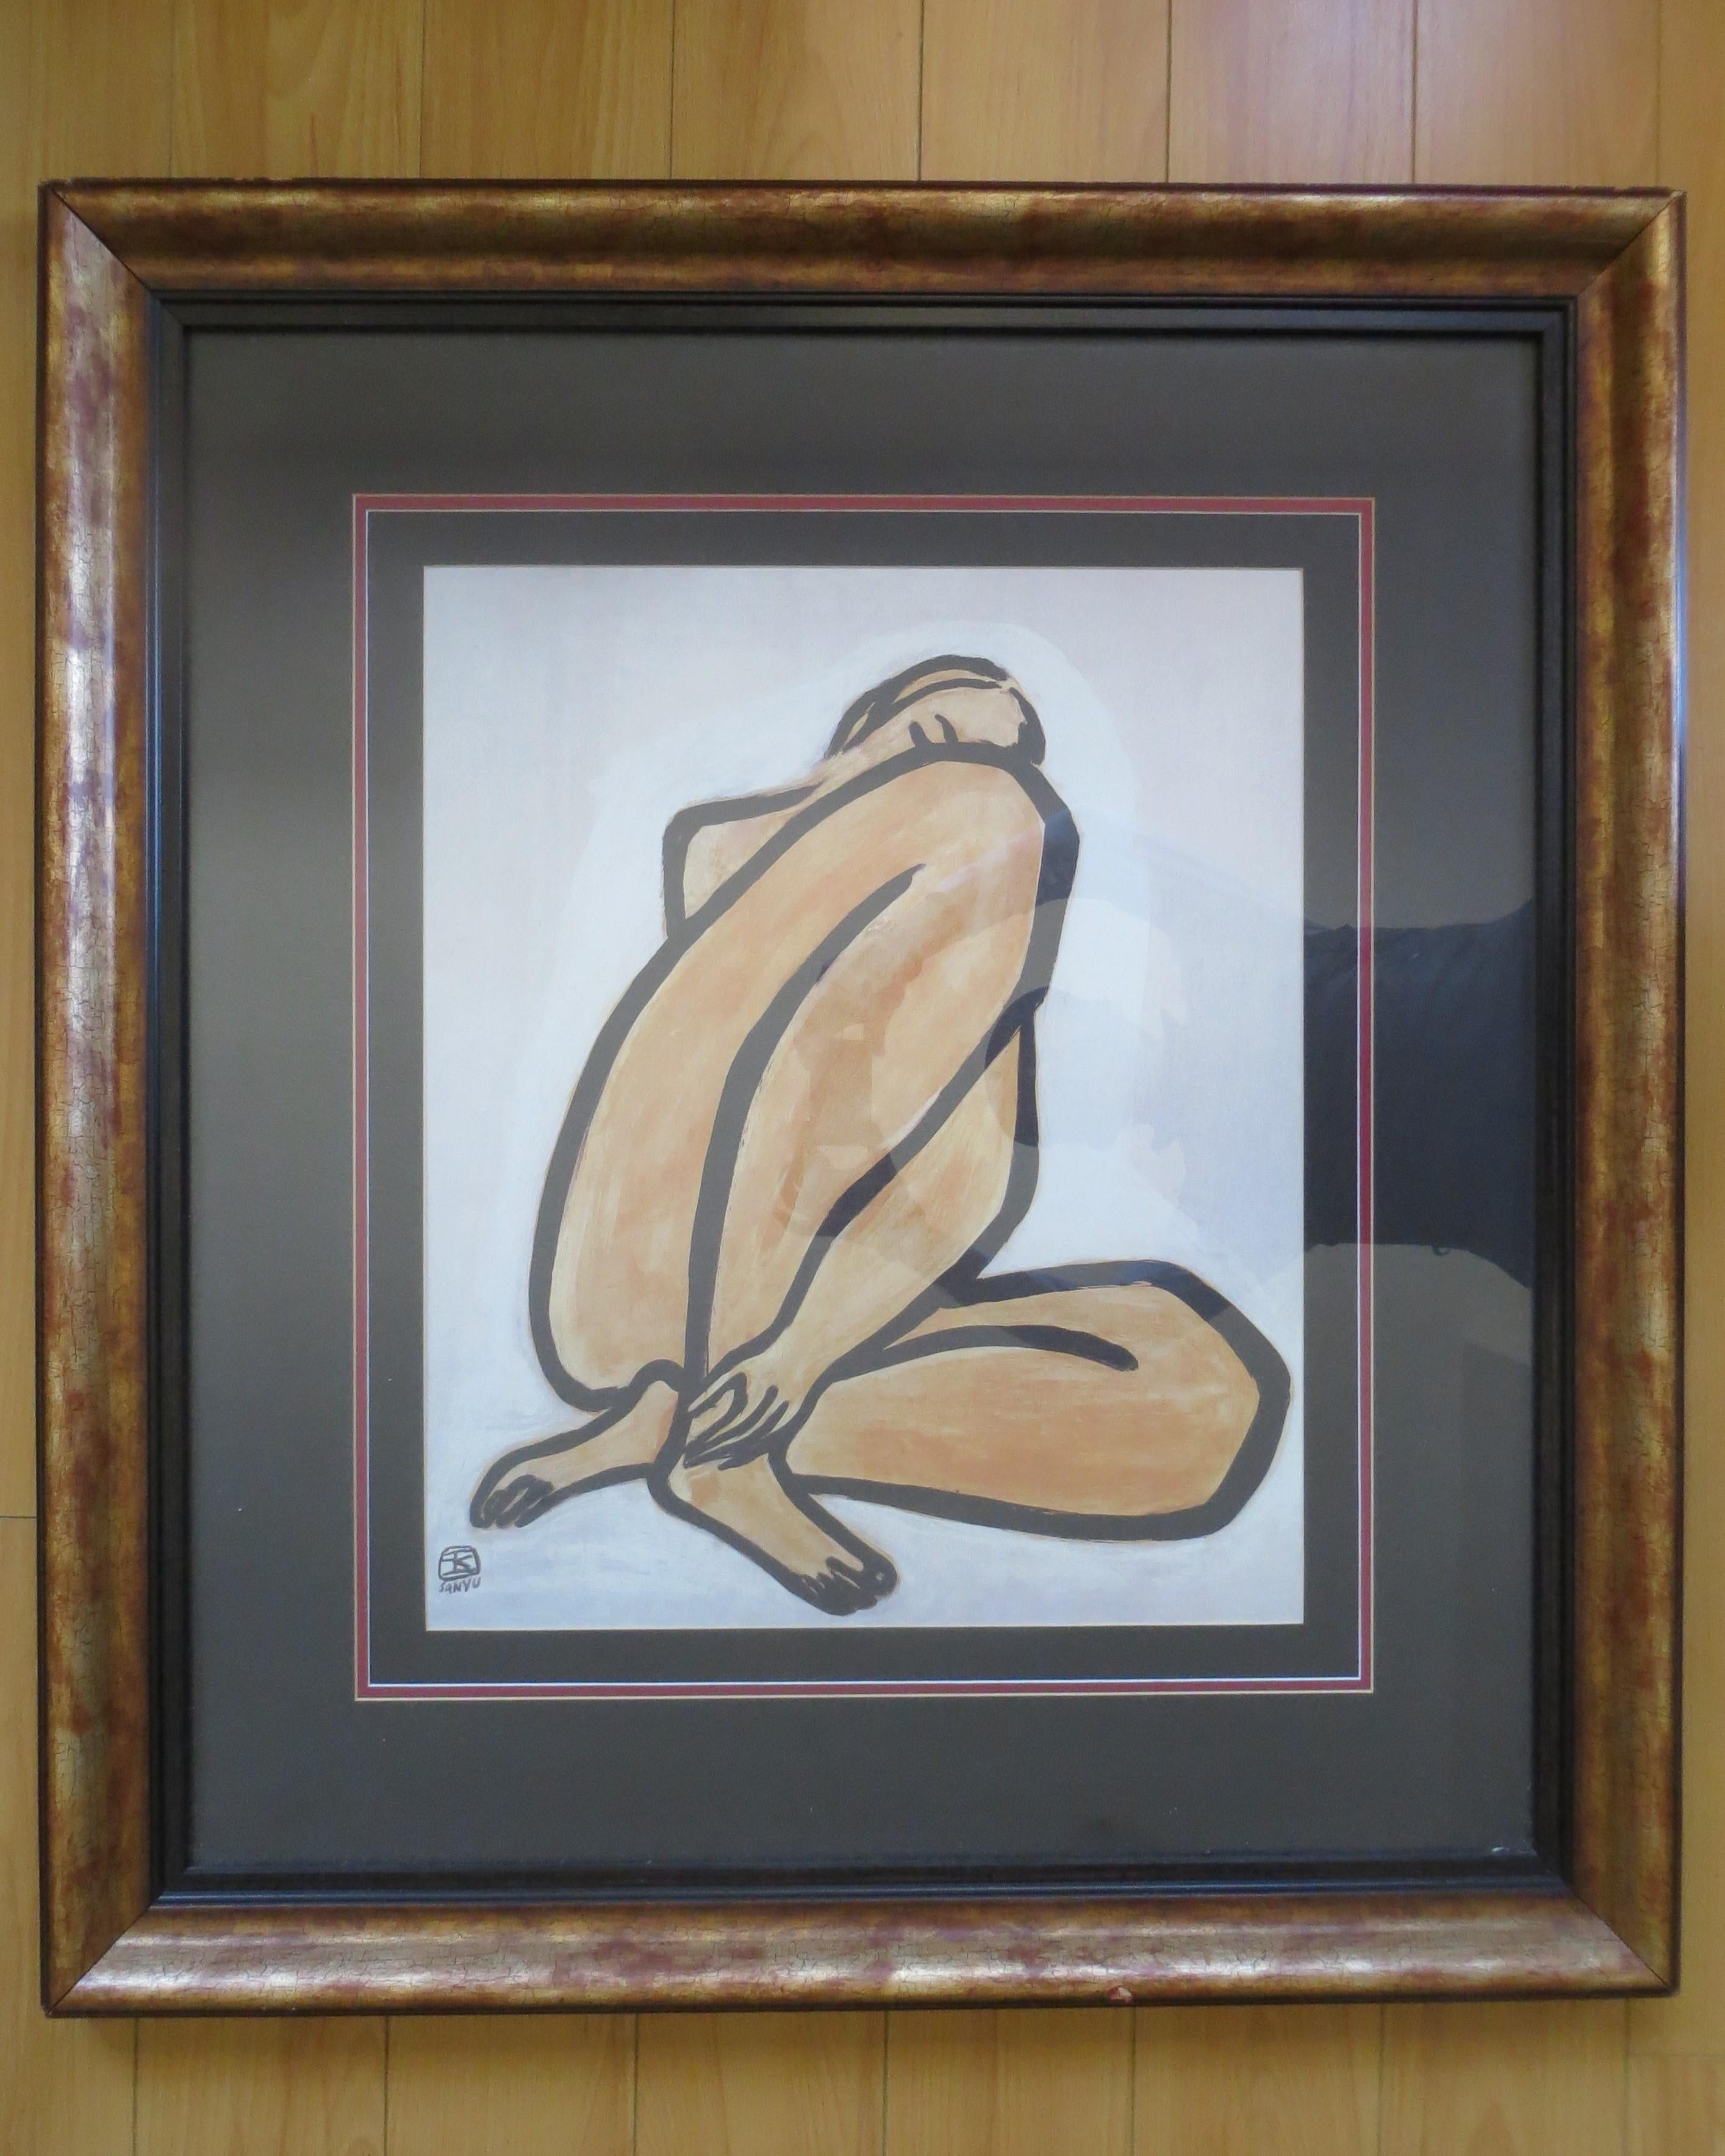 Lithograph representing a nude  signed  Sanyu
 Stamp in front to left
in a wood frame frame
Sanyu was a Chinese-French artist that created prints, drawings, and paintings. His work fused the histories of European still-life and figurative painting